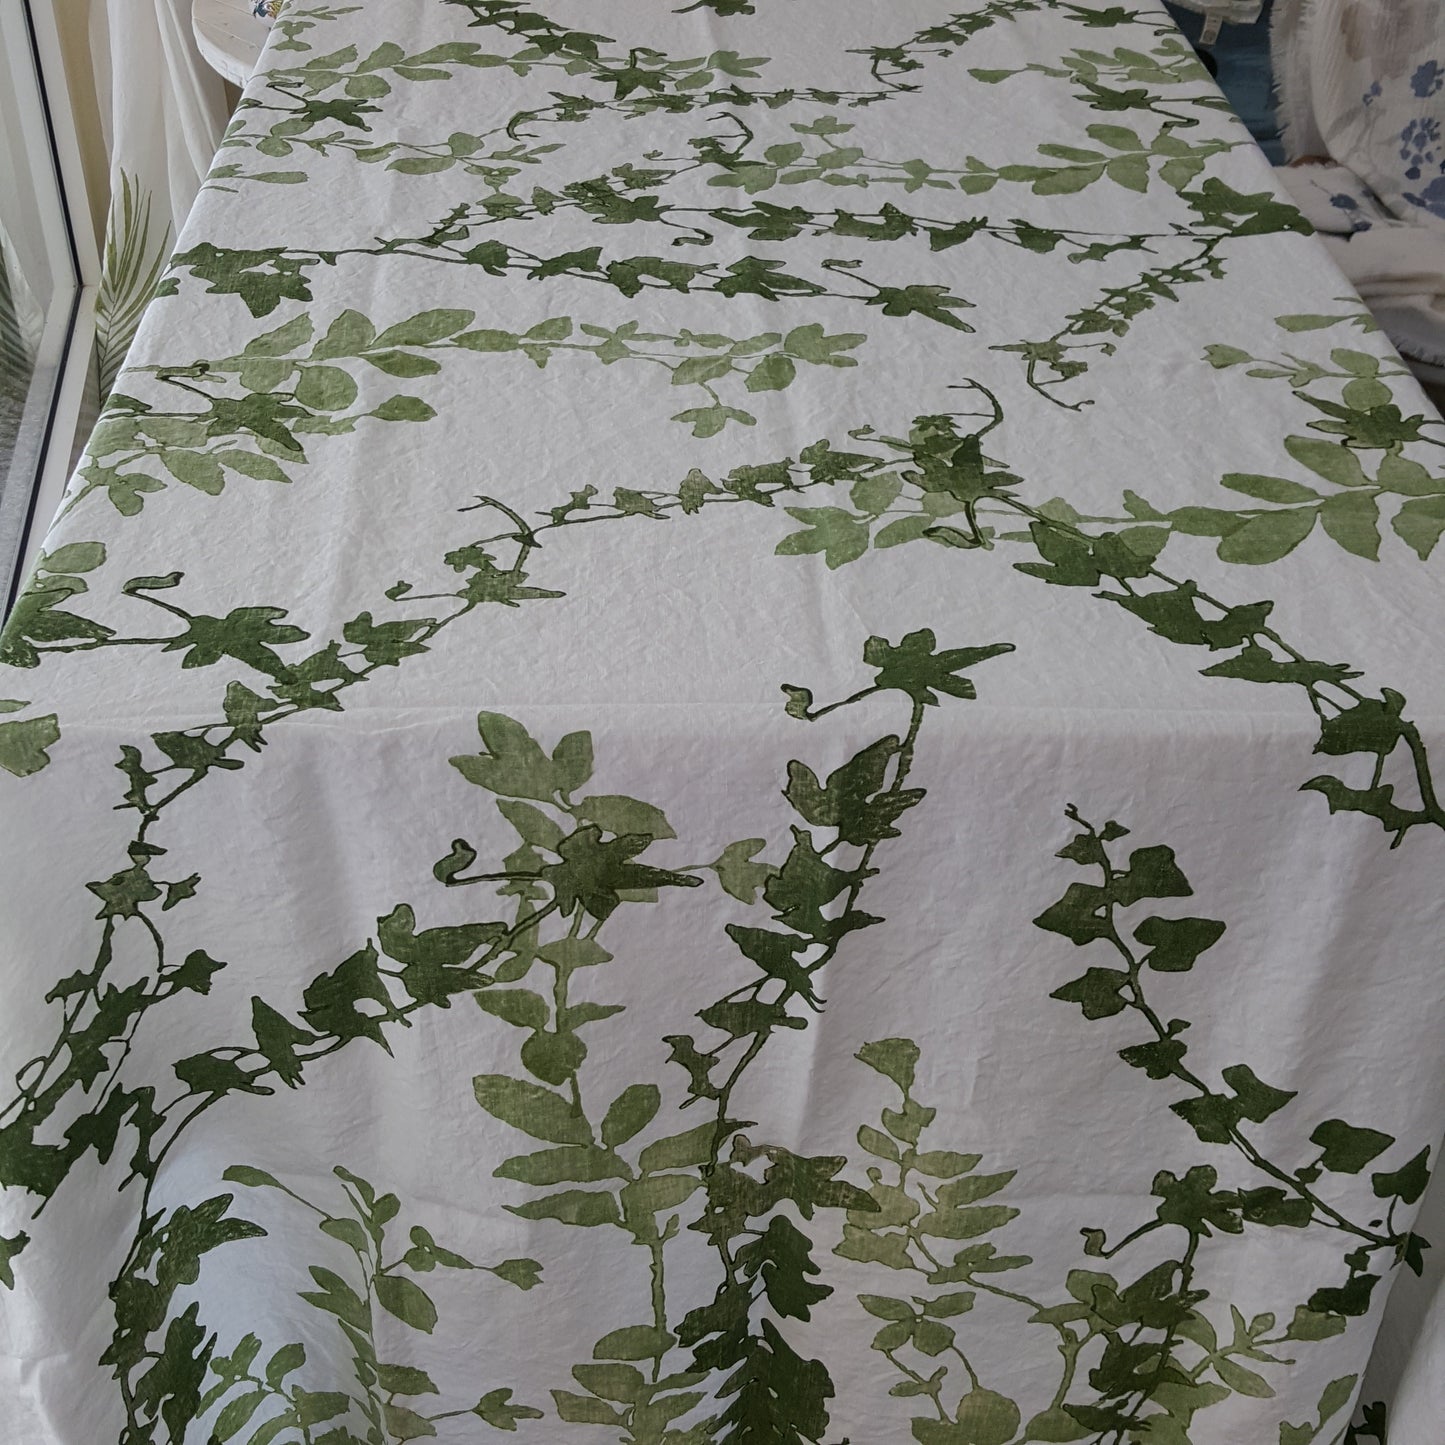 Natural linen tablecloth with yellow fork print